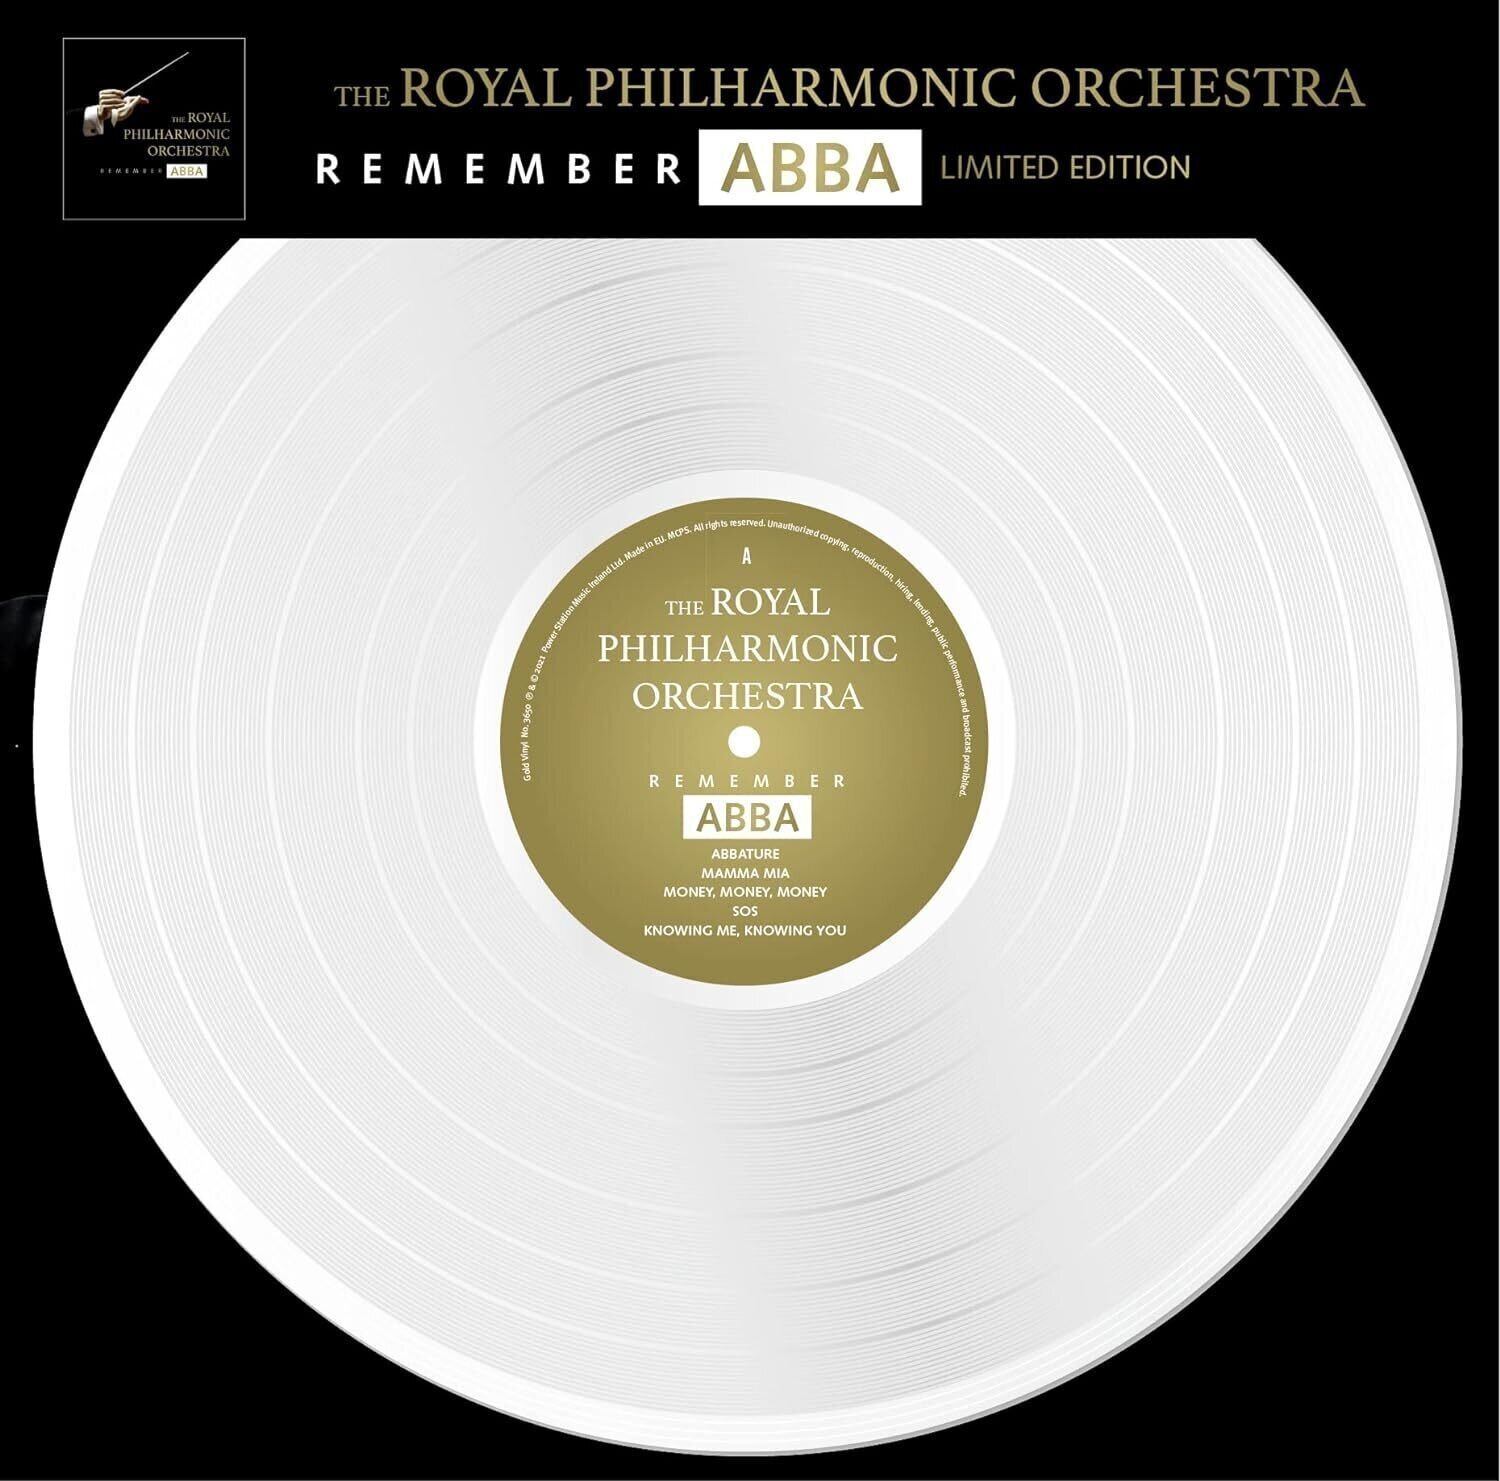 Schallplatte Royal Philharmonic Orchestra - Remember ABBA (Limited Edition) (Numbered) (Reissue) (White Coloured) (LP)